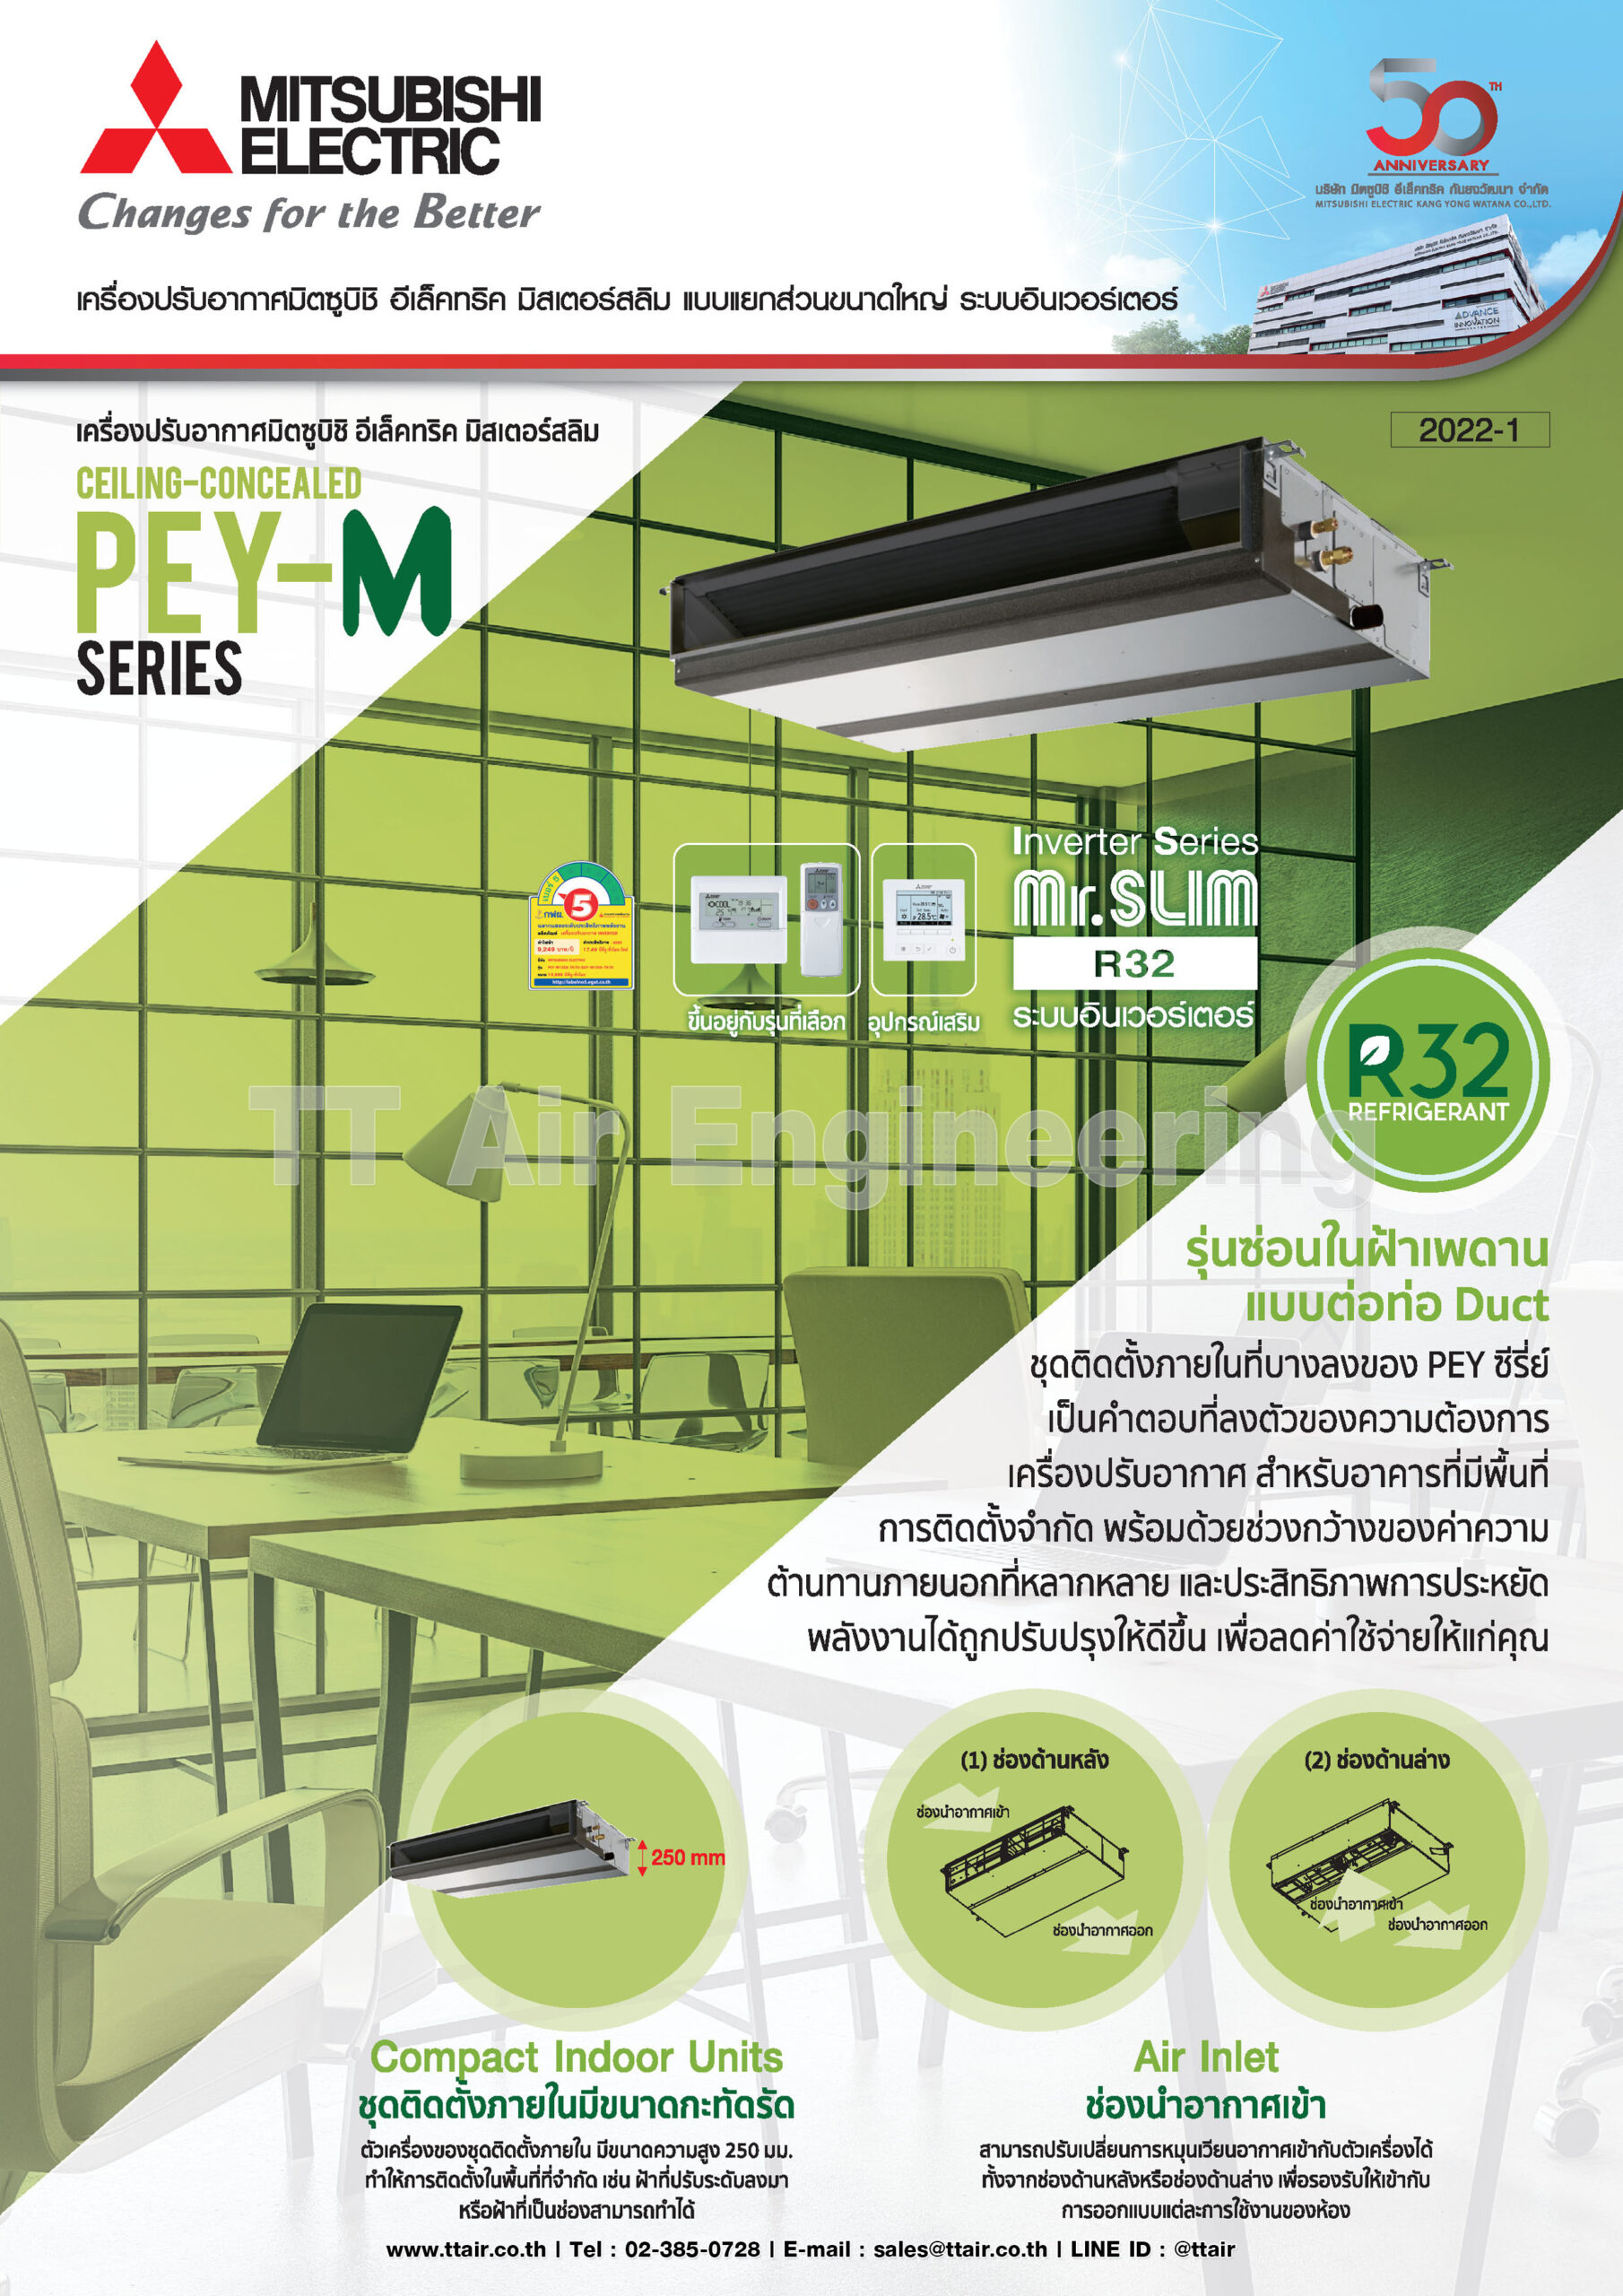 catalog MITSUBISHI ELECTRIC Ceiling Concealed Type PEY Series